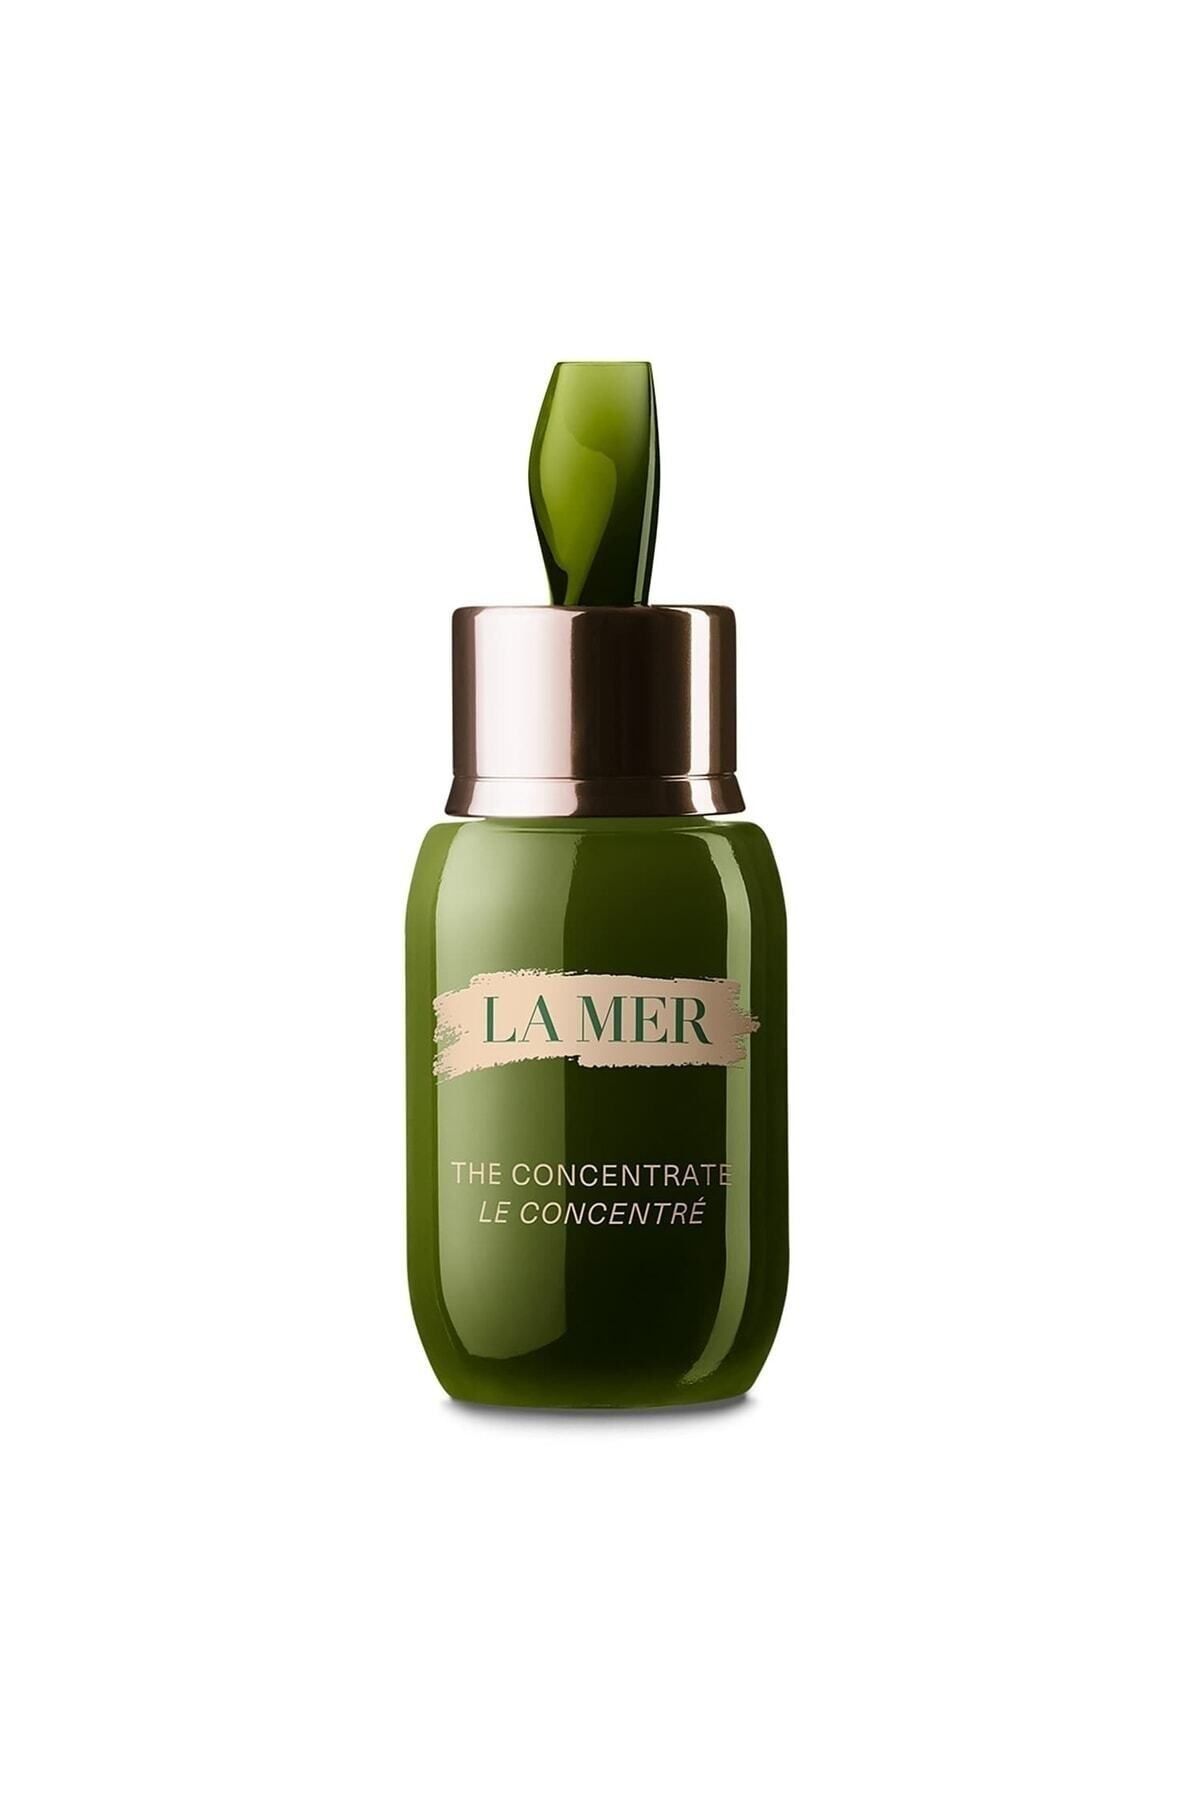 La Mer The Concentrate Serum -15ml- .MIRACLE040332